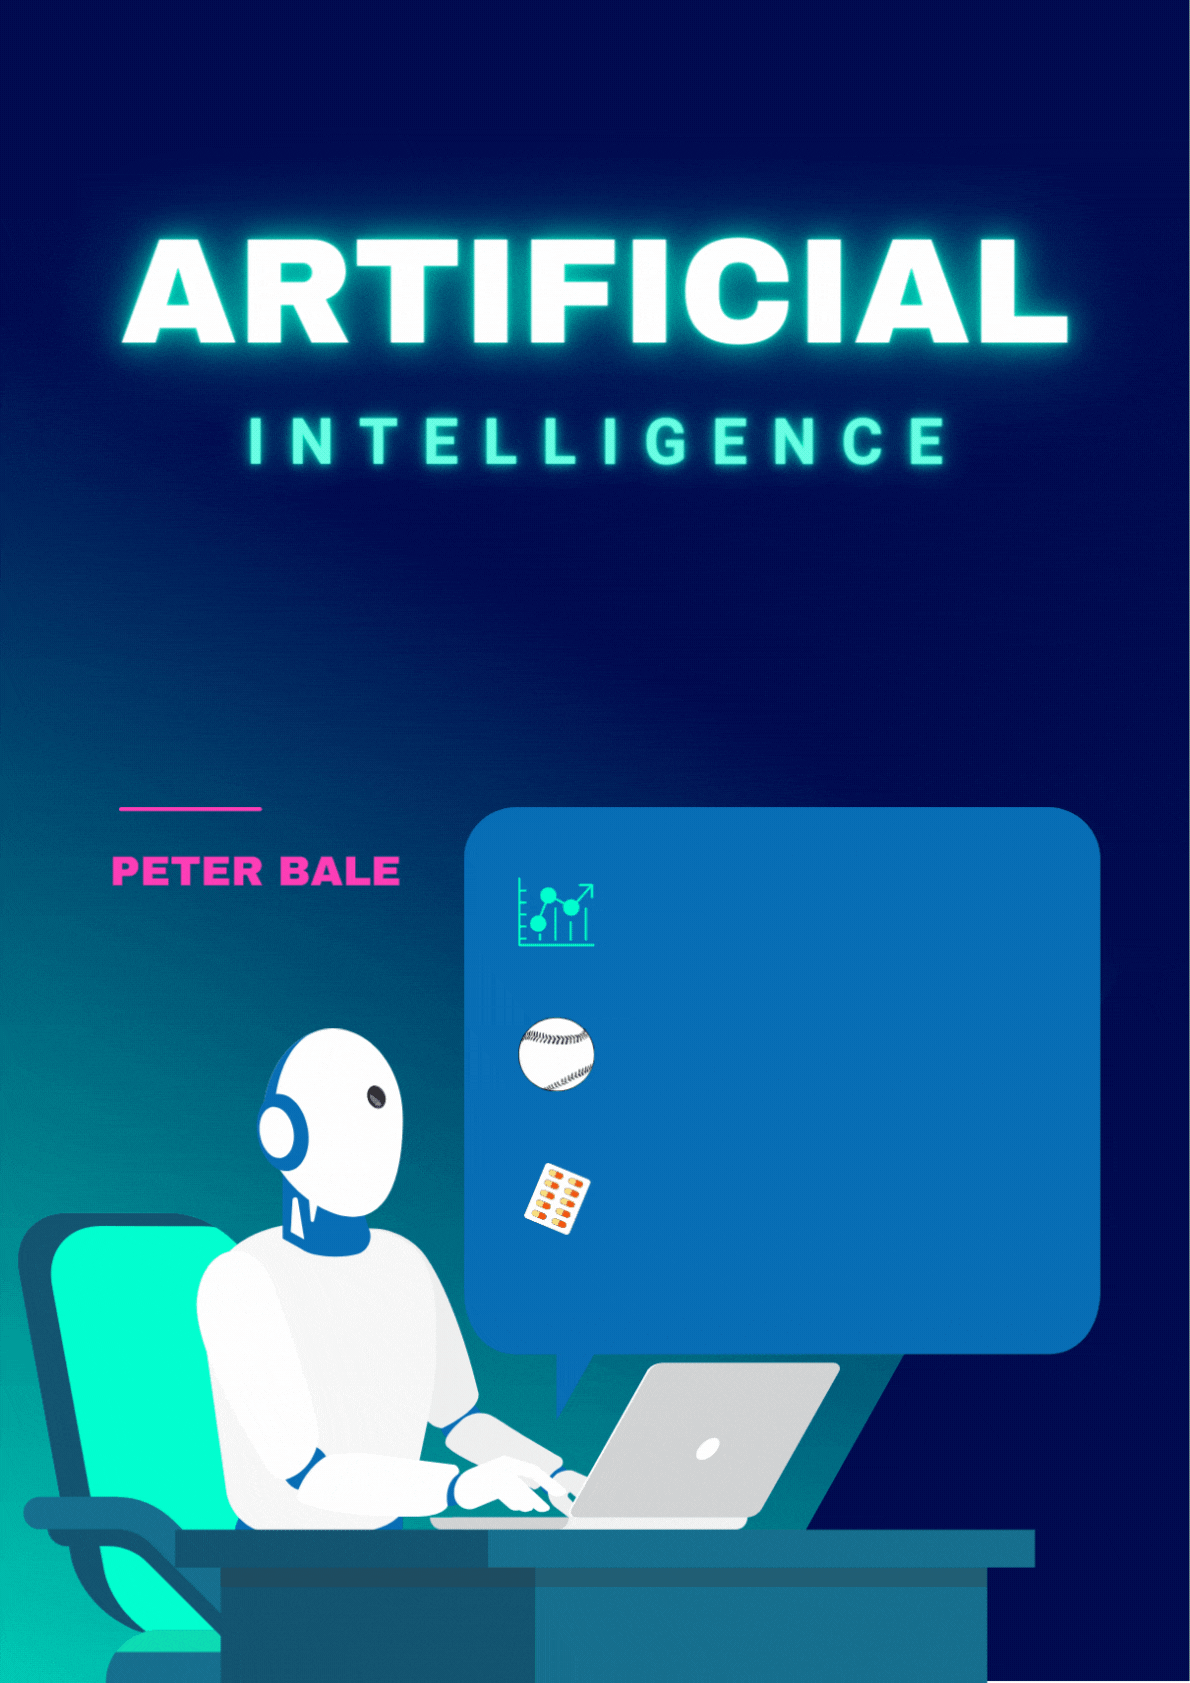 _black-illustrated-artificial-intelligence-and-robot-working-with-laptop-poster(1).gif